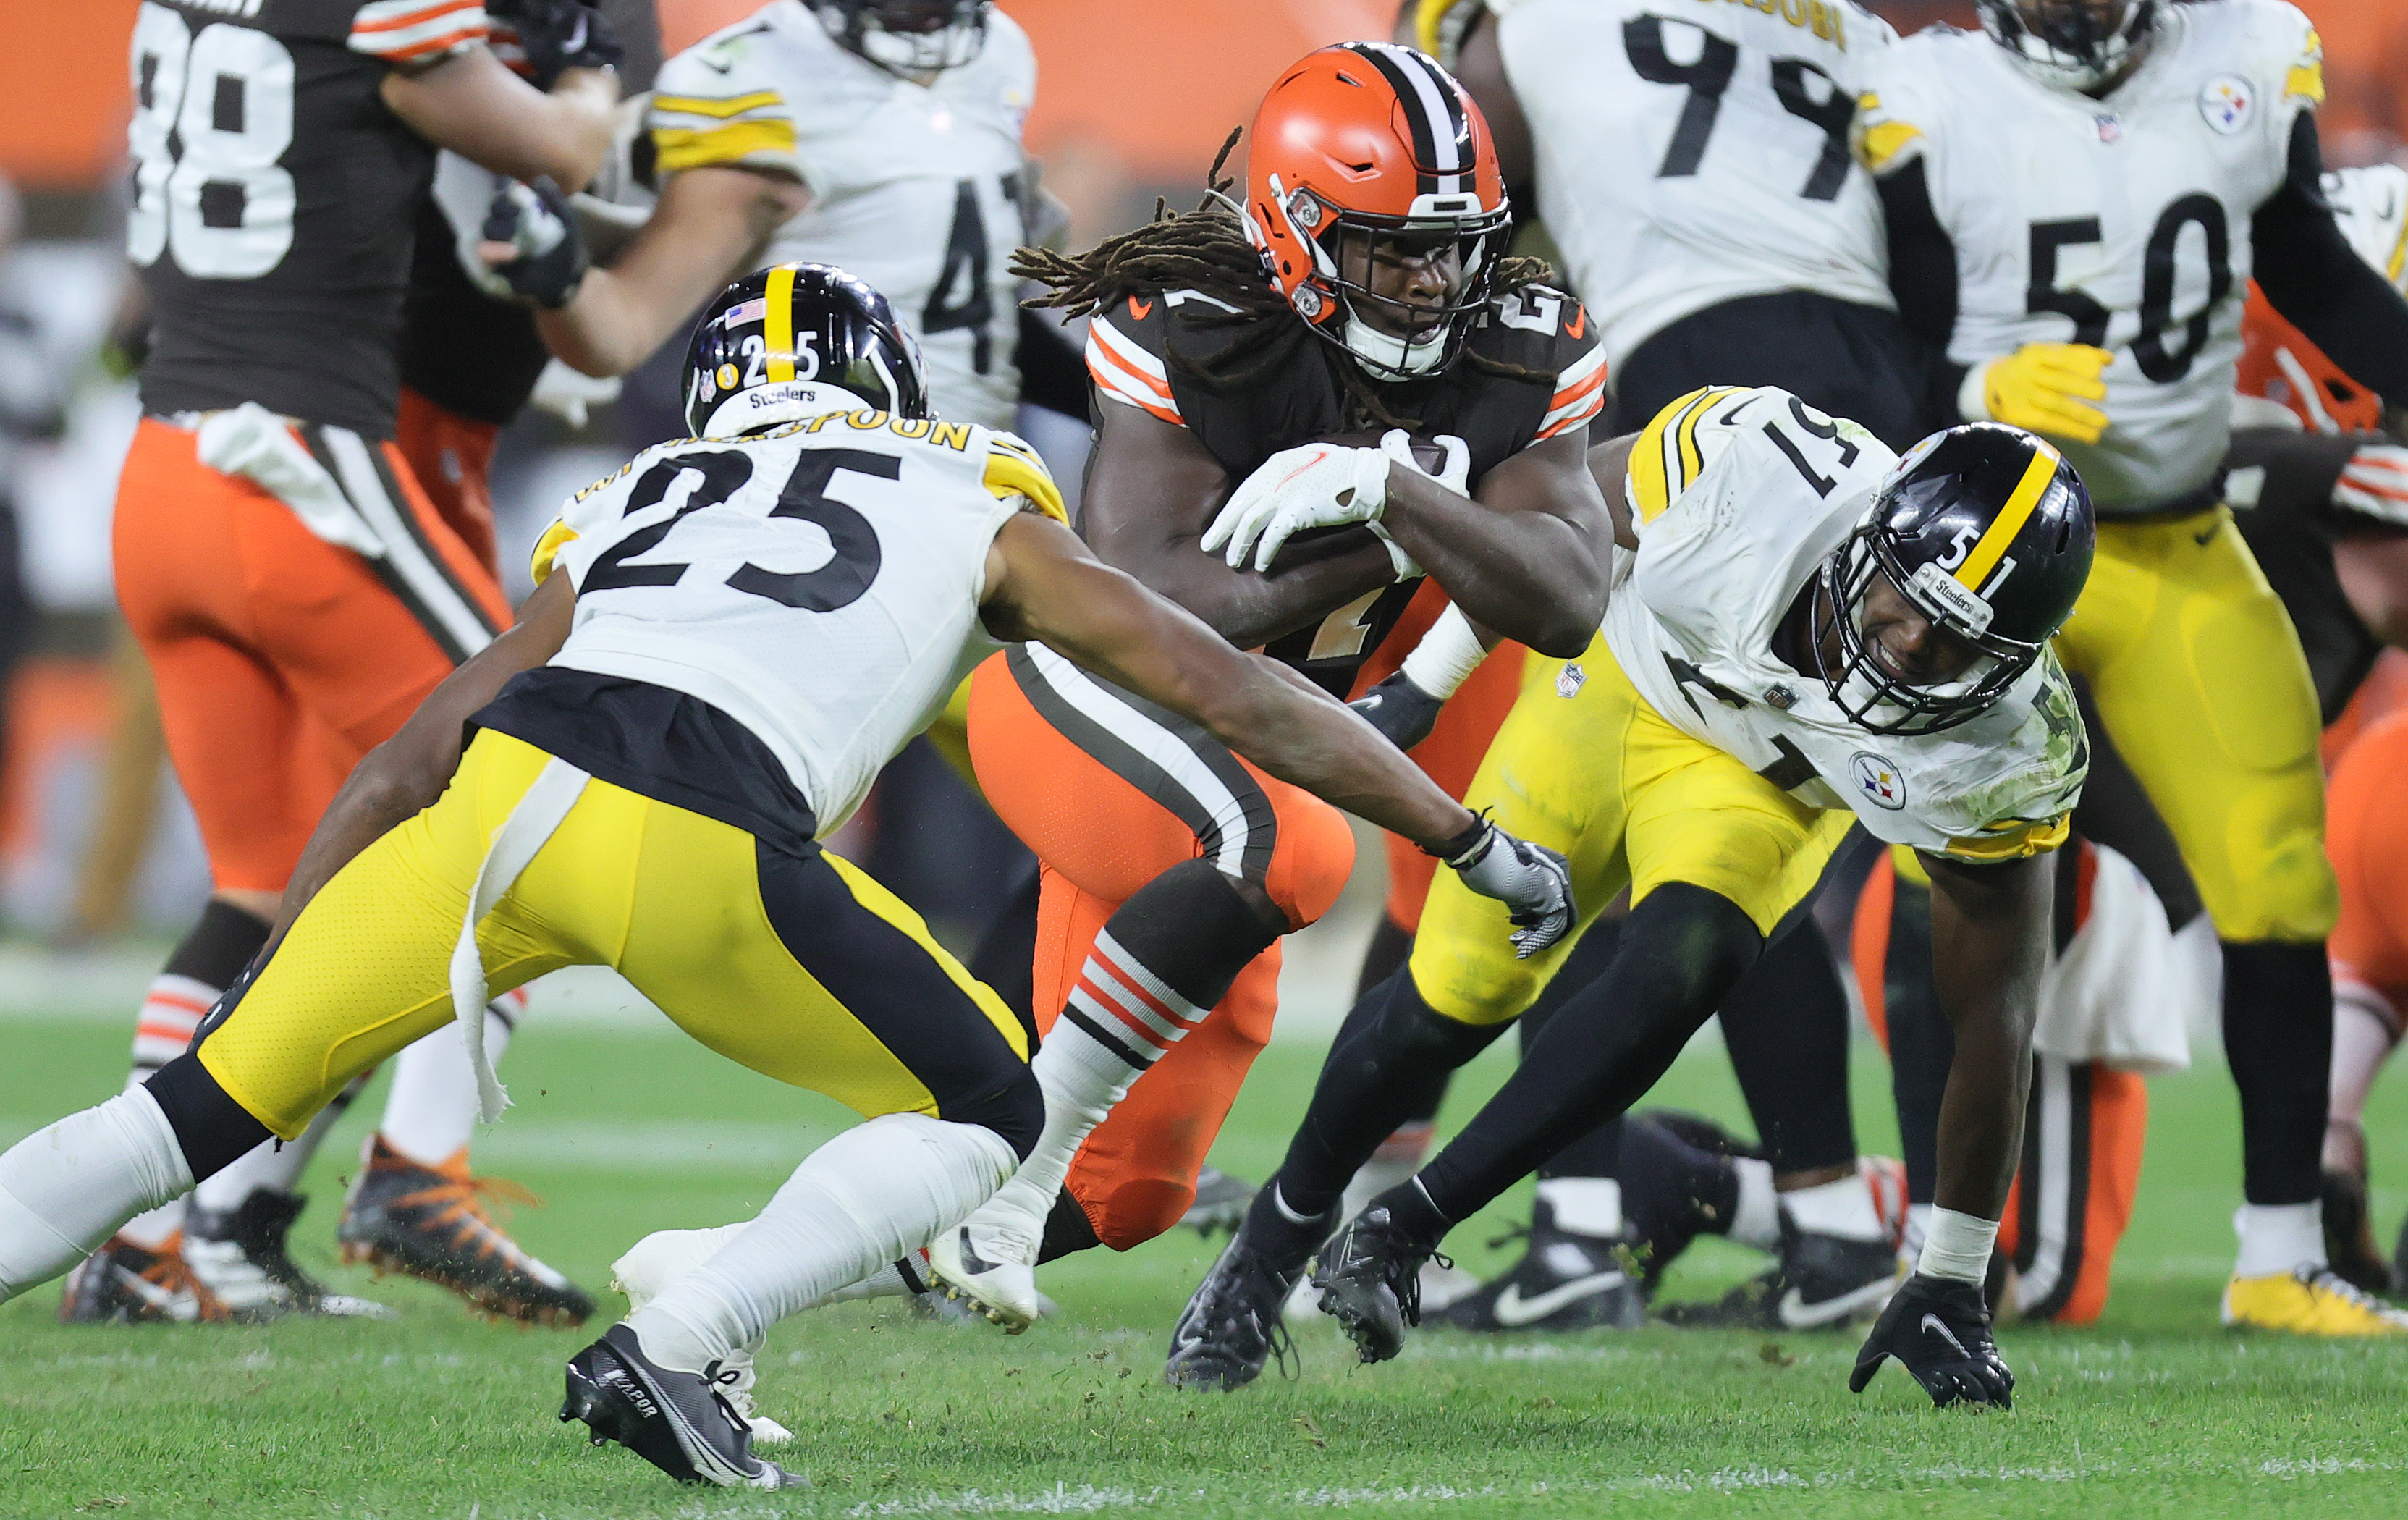 Cleveland Browns vs Pittsburgh Steelers: times, how to watch on TV